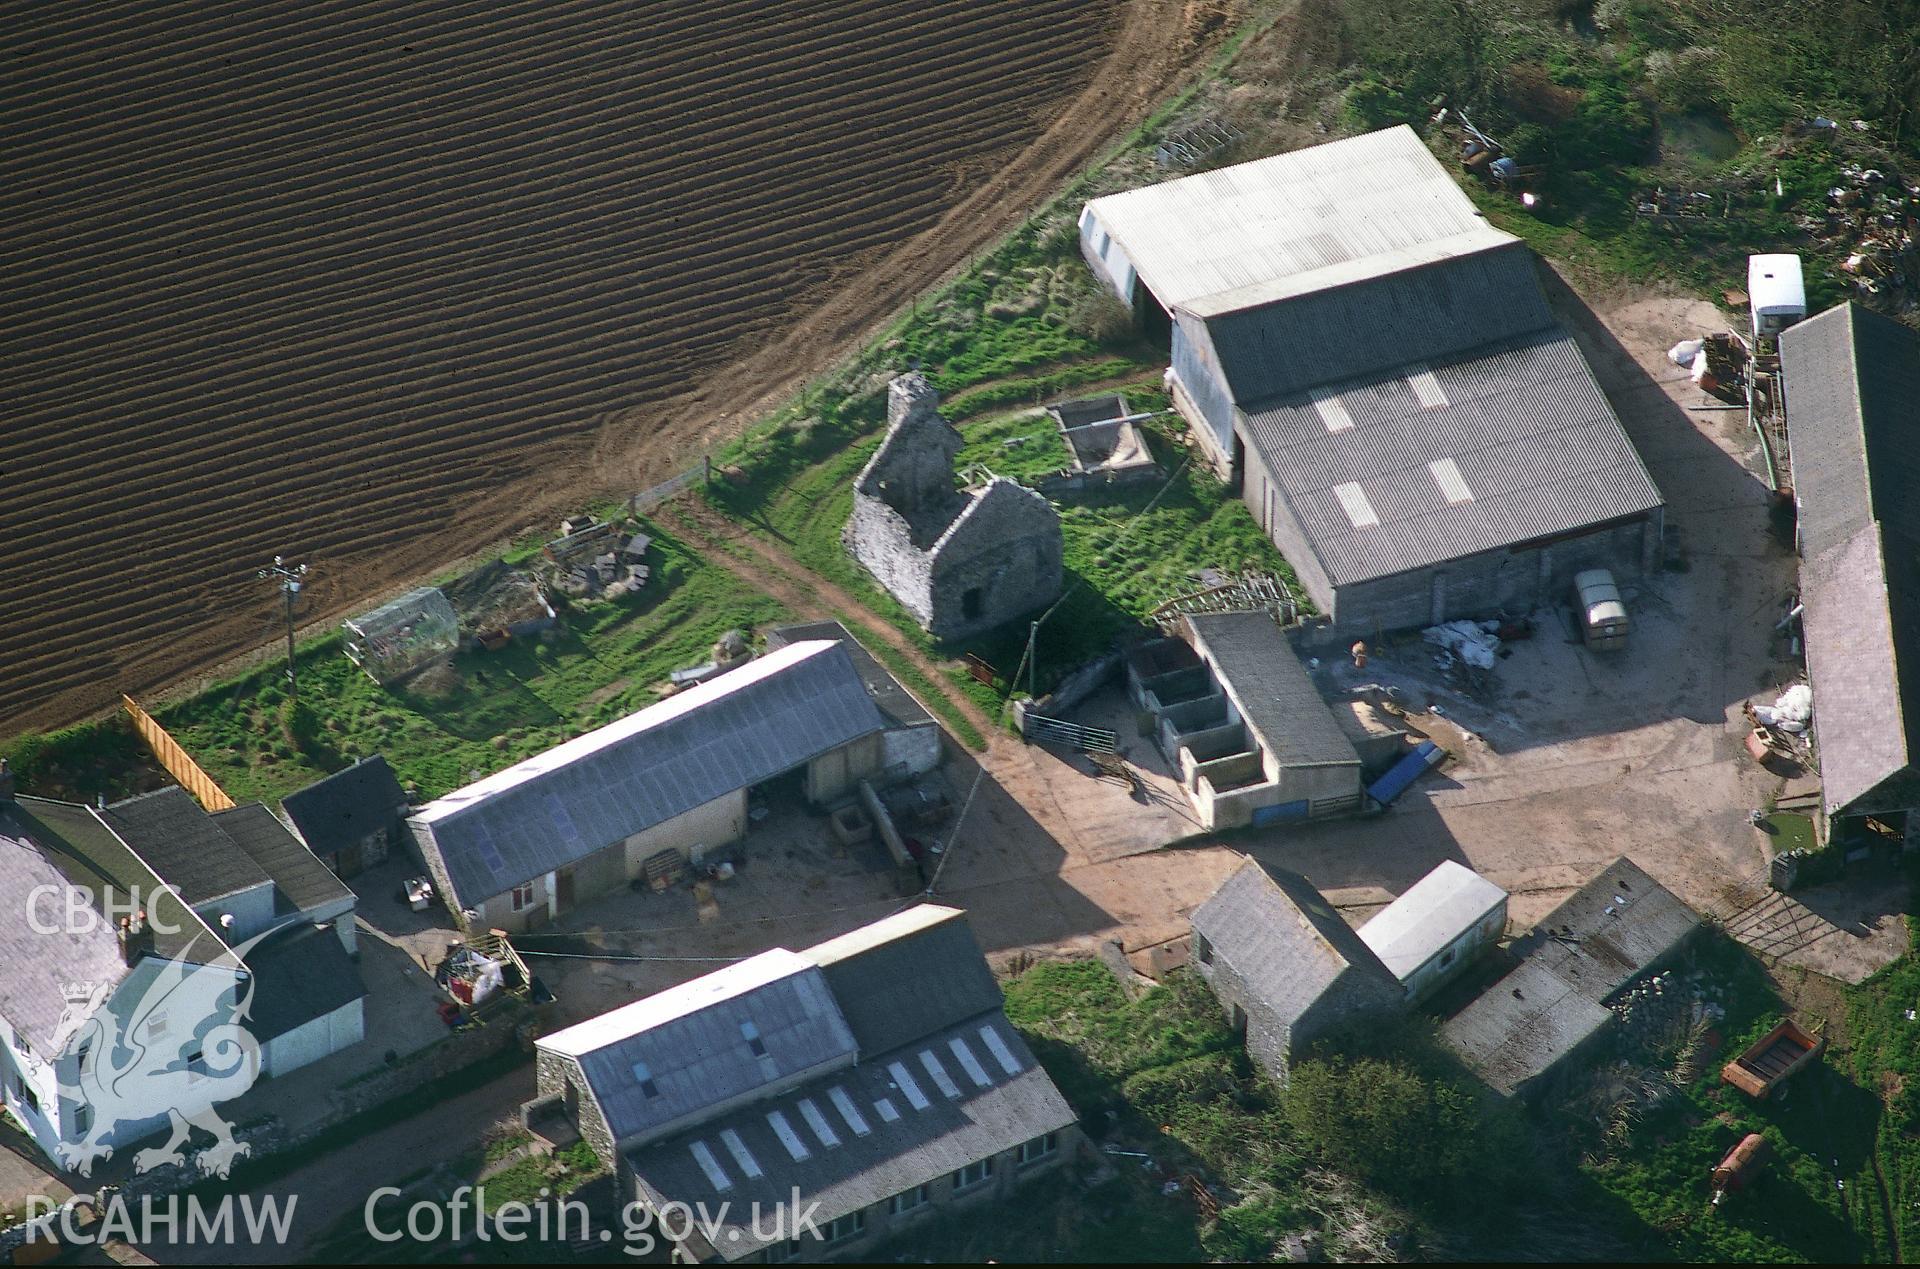 Slide of RCAHMW colour oblique aerial photograph of ruins at Carswell Farm, taken by C.R. Musson, 13/4/1995.